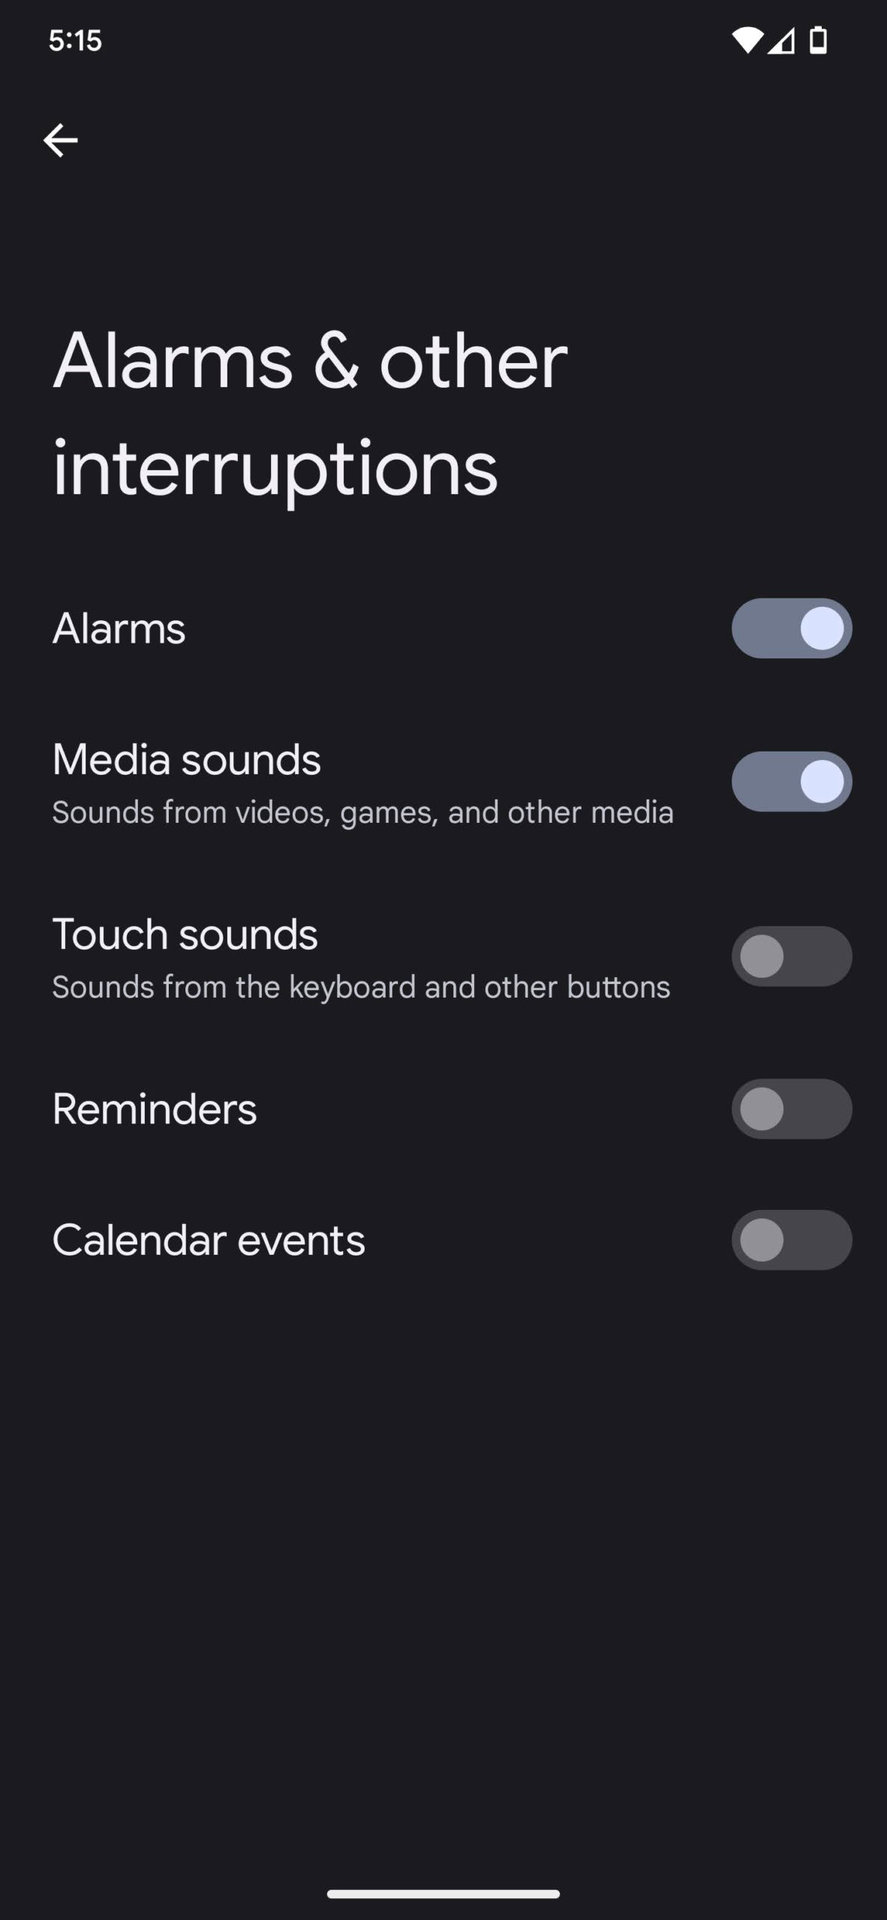 How to choose which notifications you want to hide or show 6